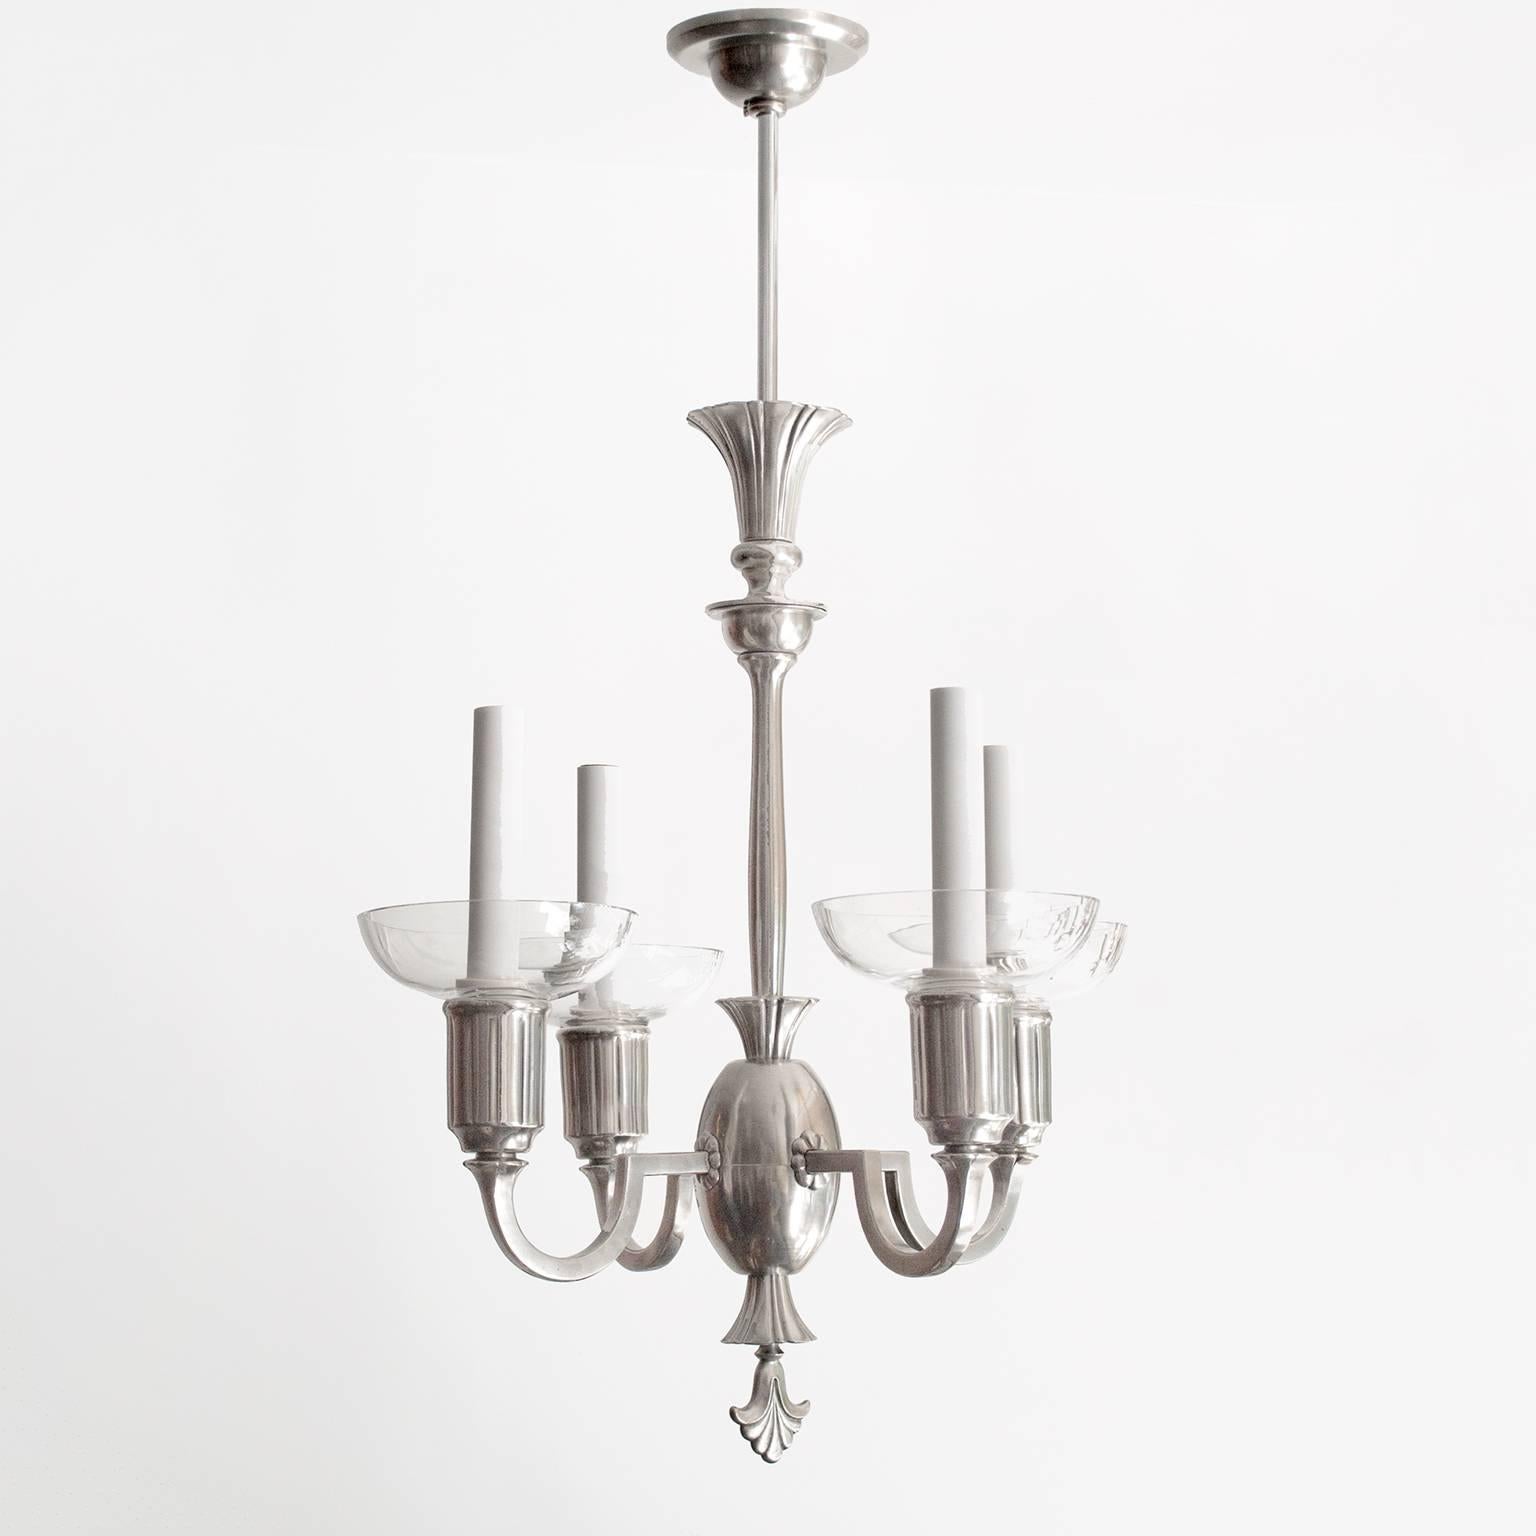 Delicate Swedish Art Deco 4-arm chandelier in polished and lacquered pewter. Each arm holds a candelabra socket, a sleeve and a crystal bobeche. A modern design which features many classical details. Newly electrified in excellent condition.